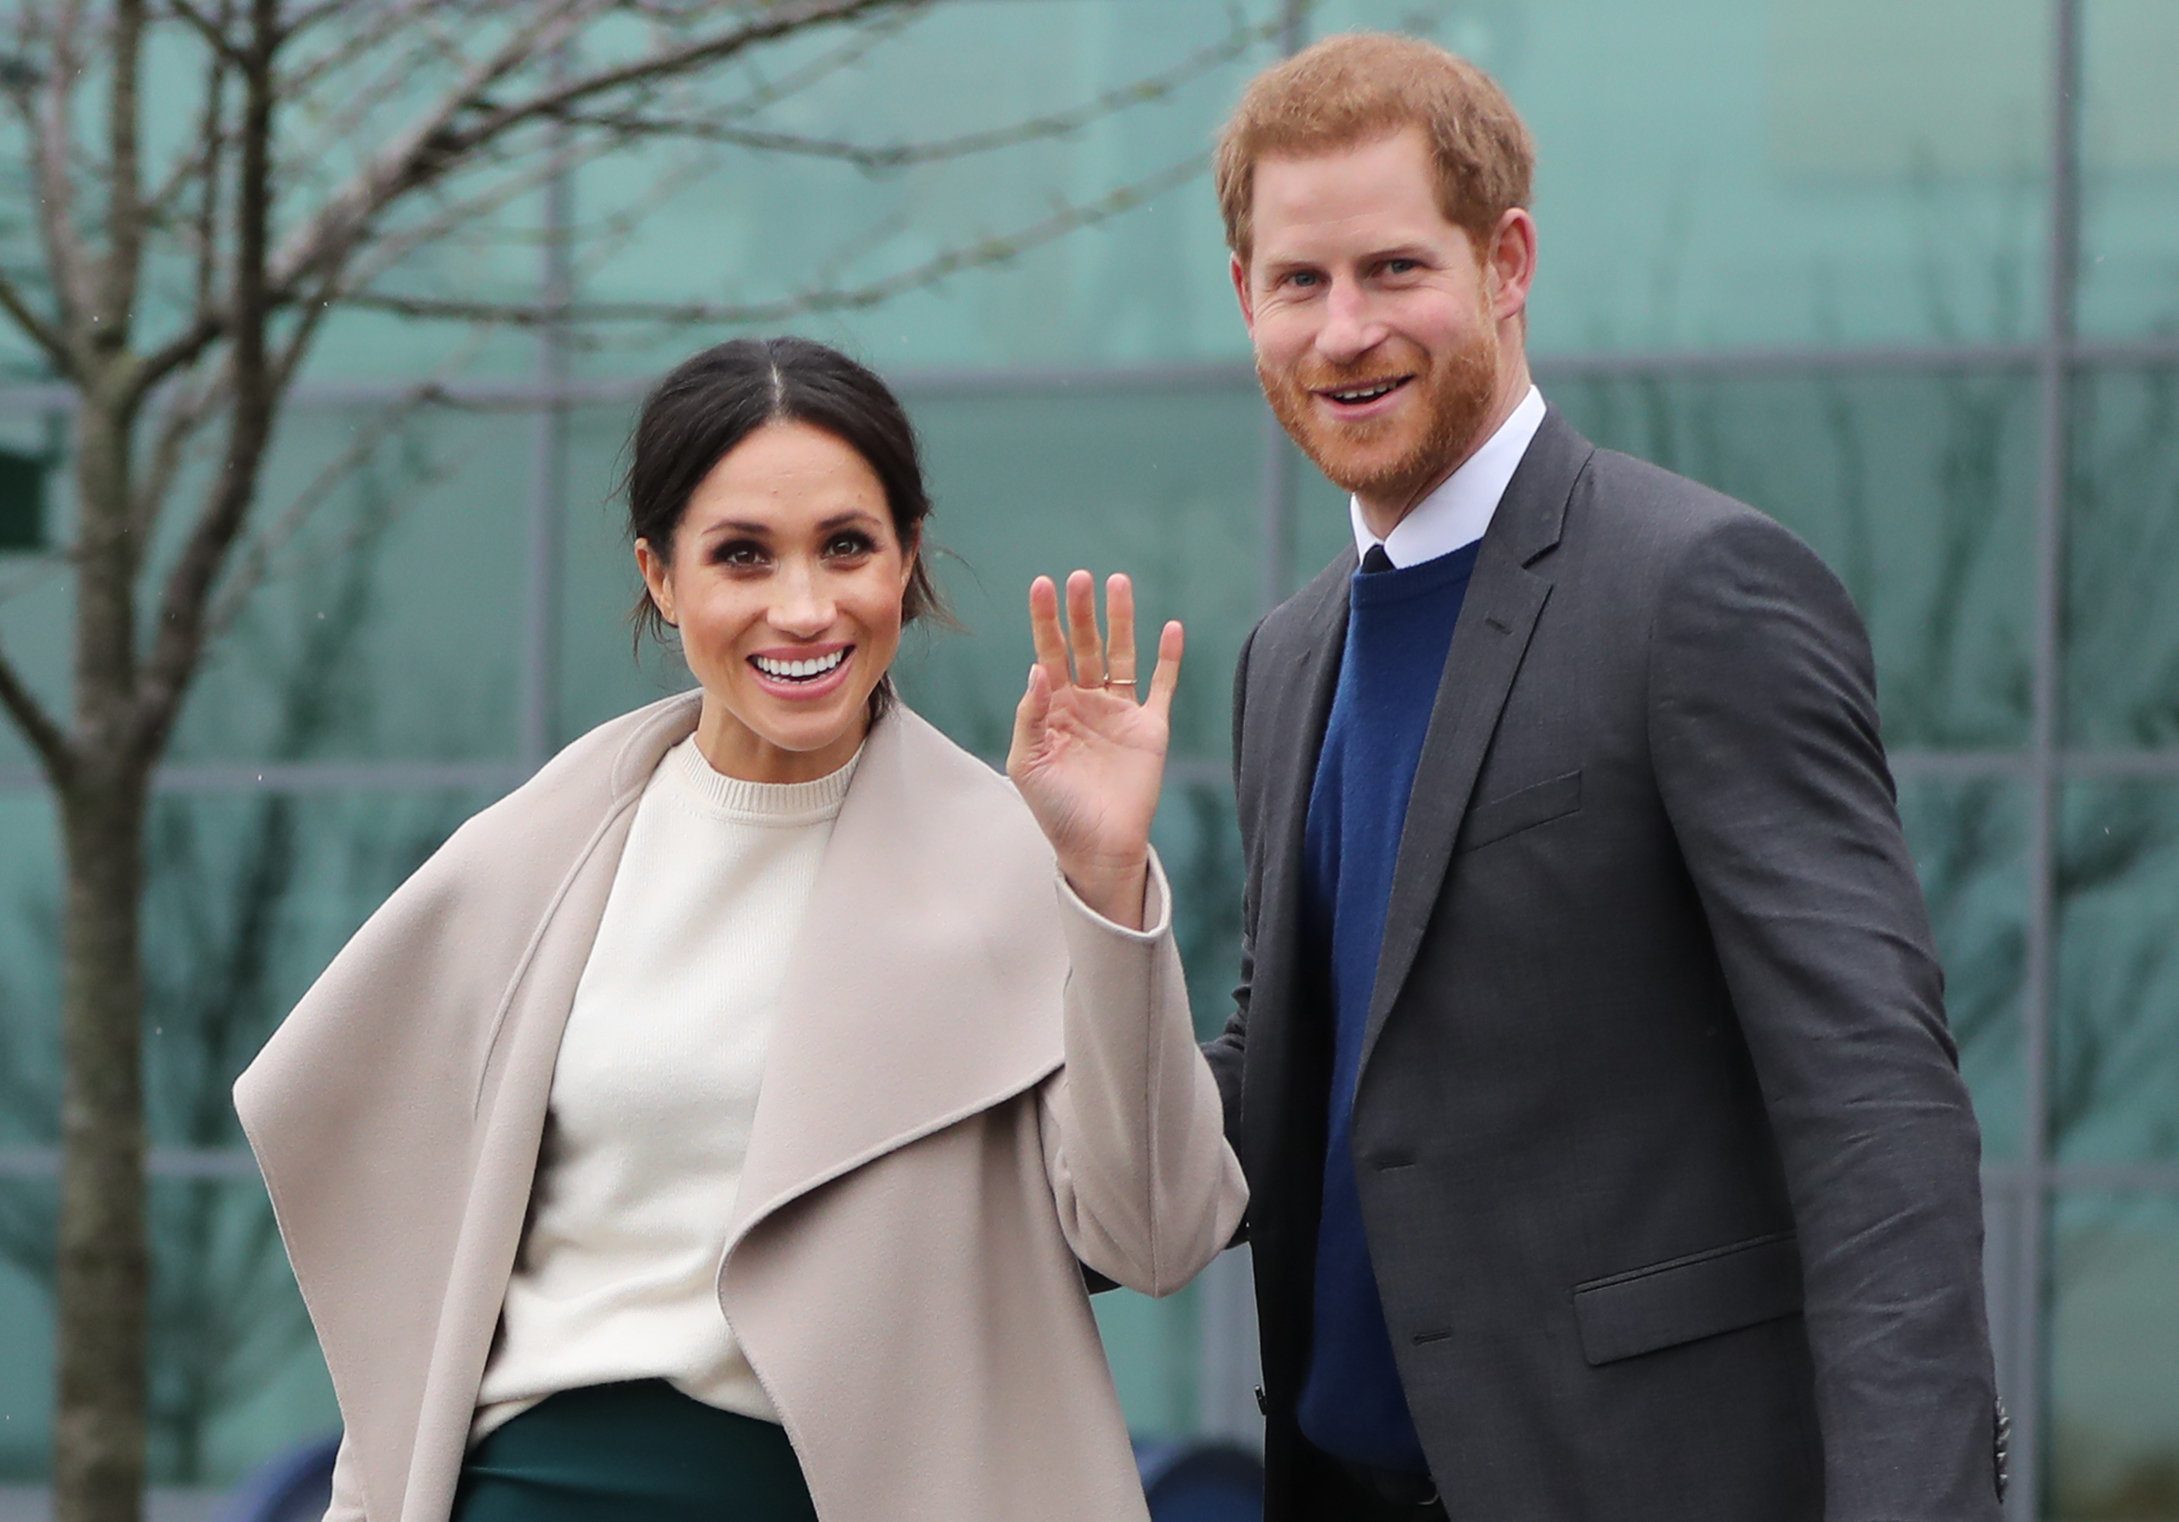 Prince Harry and Meghan Markle ask for charity donations over wedding gifts  - Third Sector - News, Leadership and Professional Development